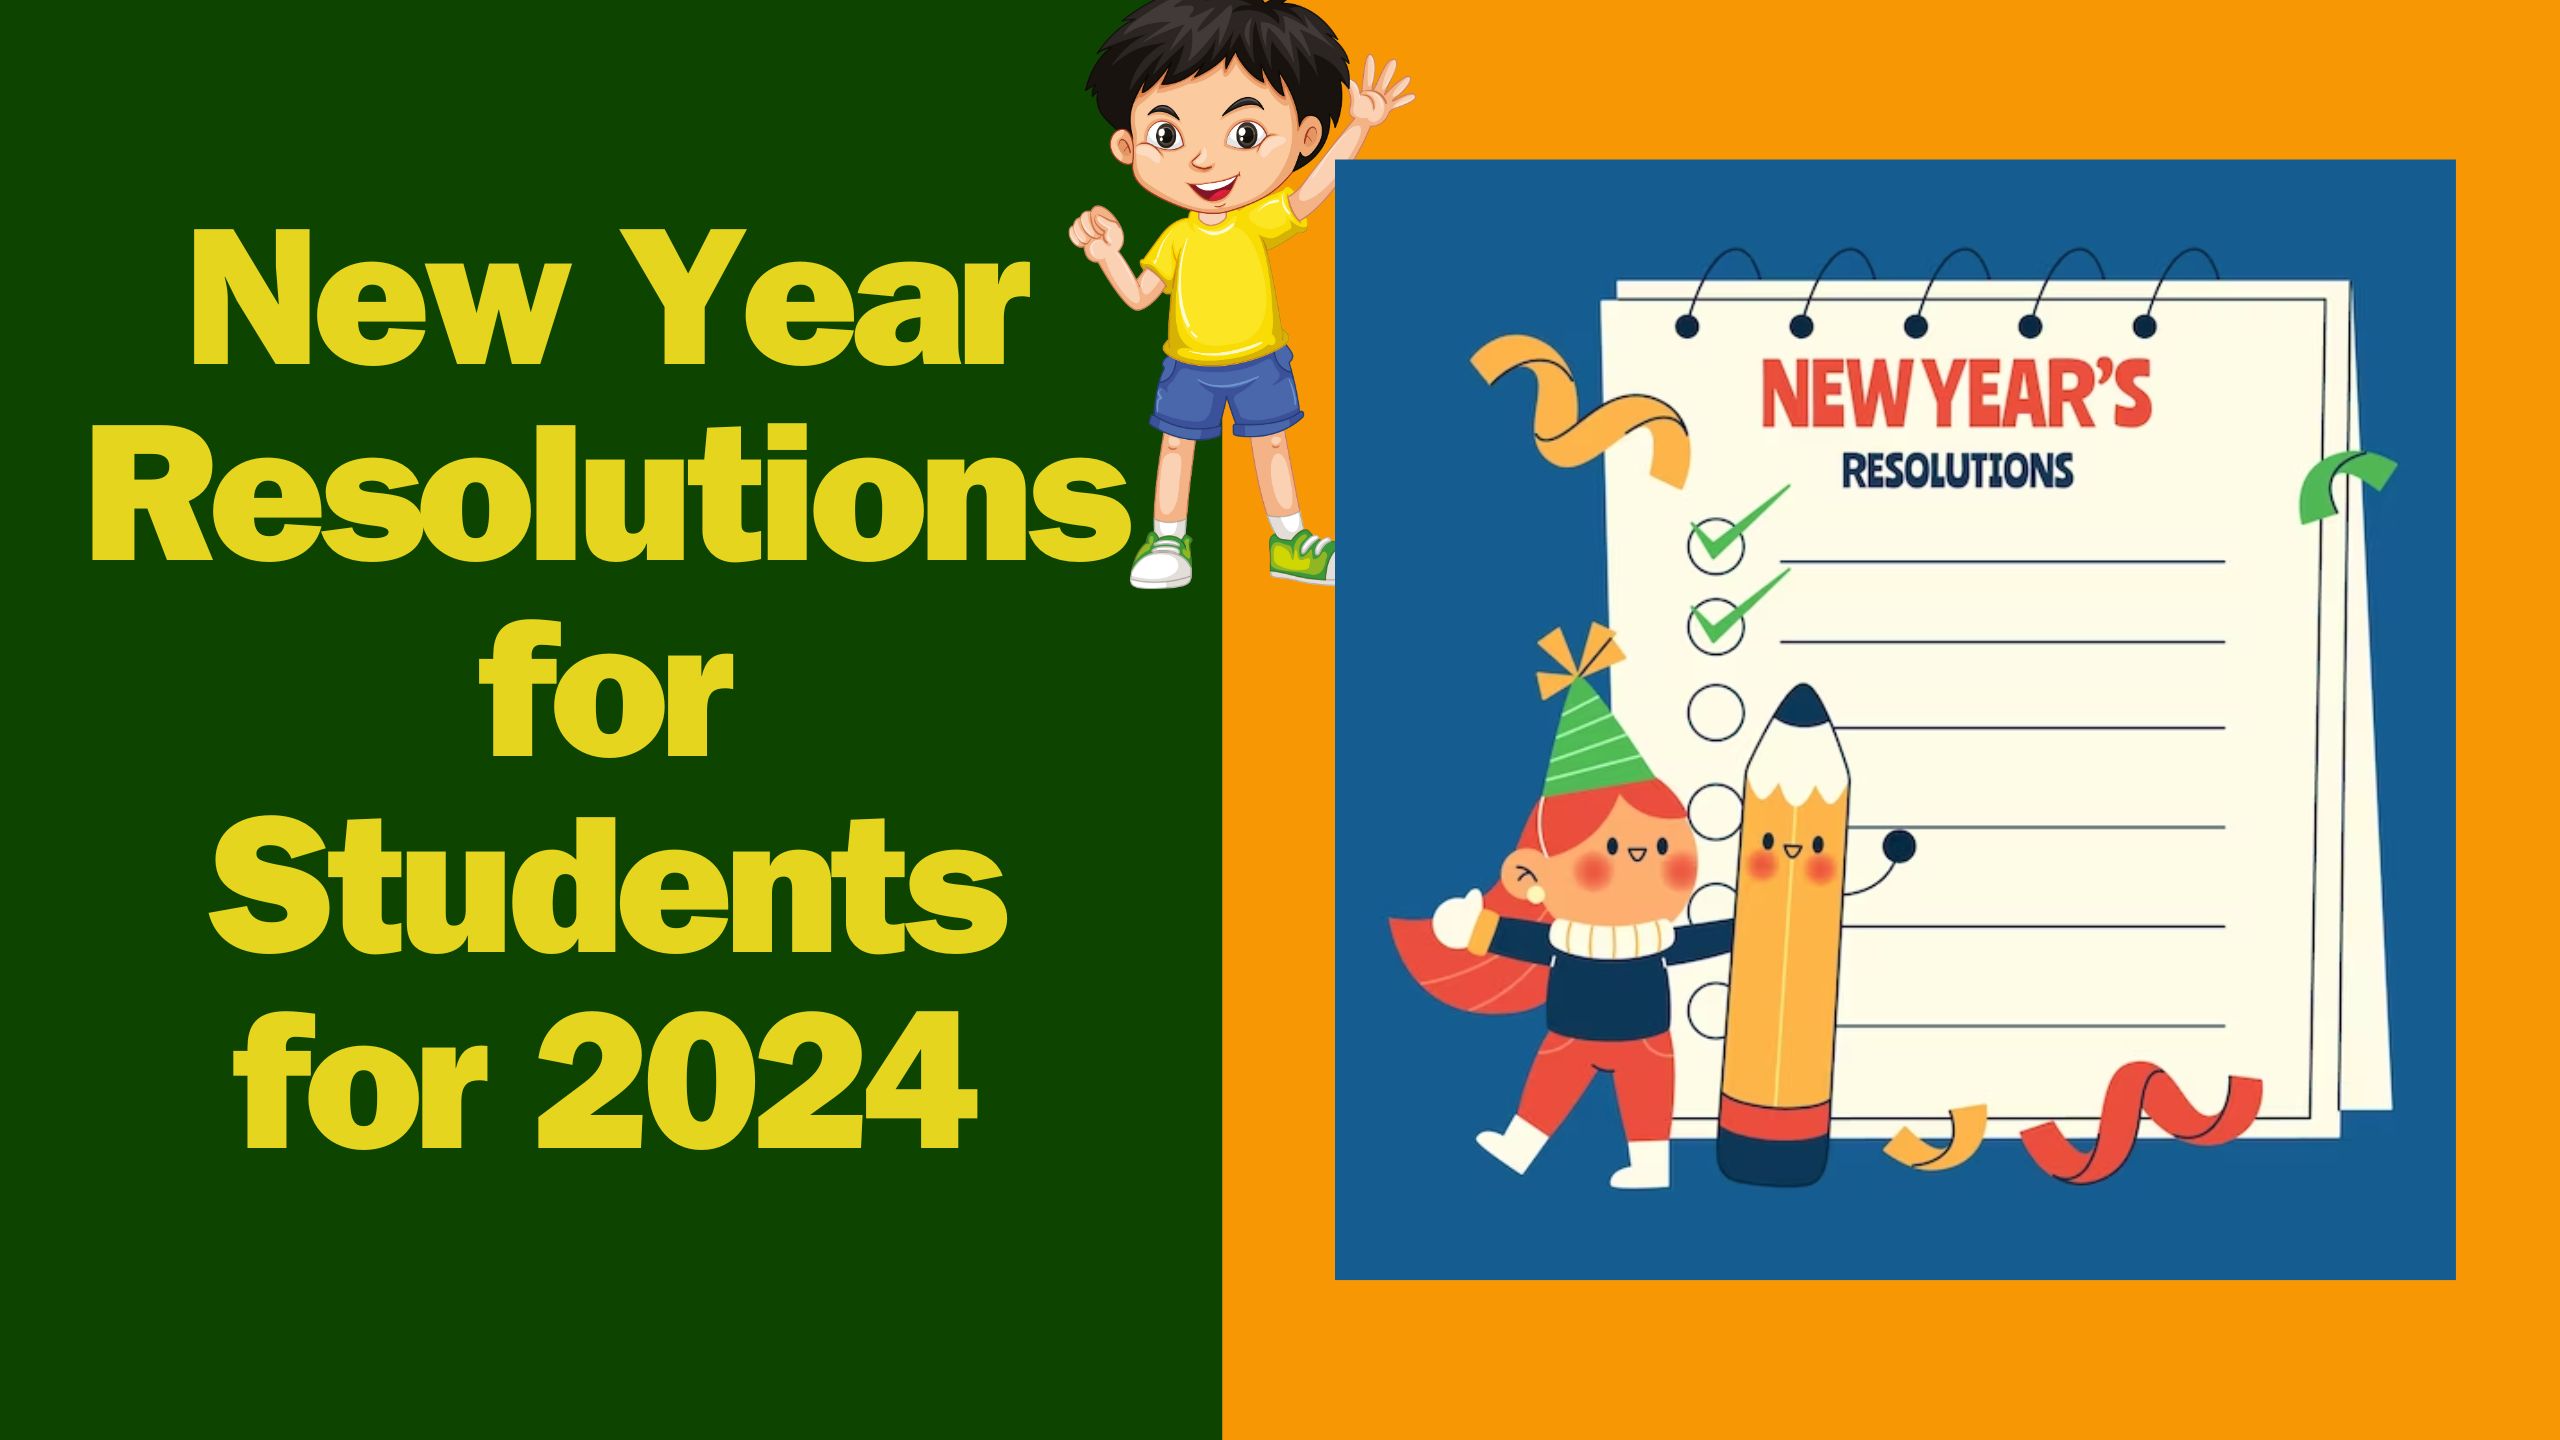 New Year Resolutions for Students for 2024